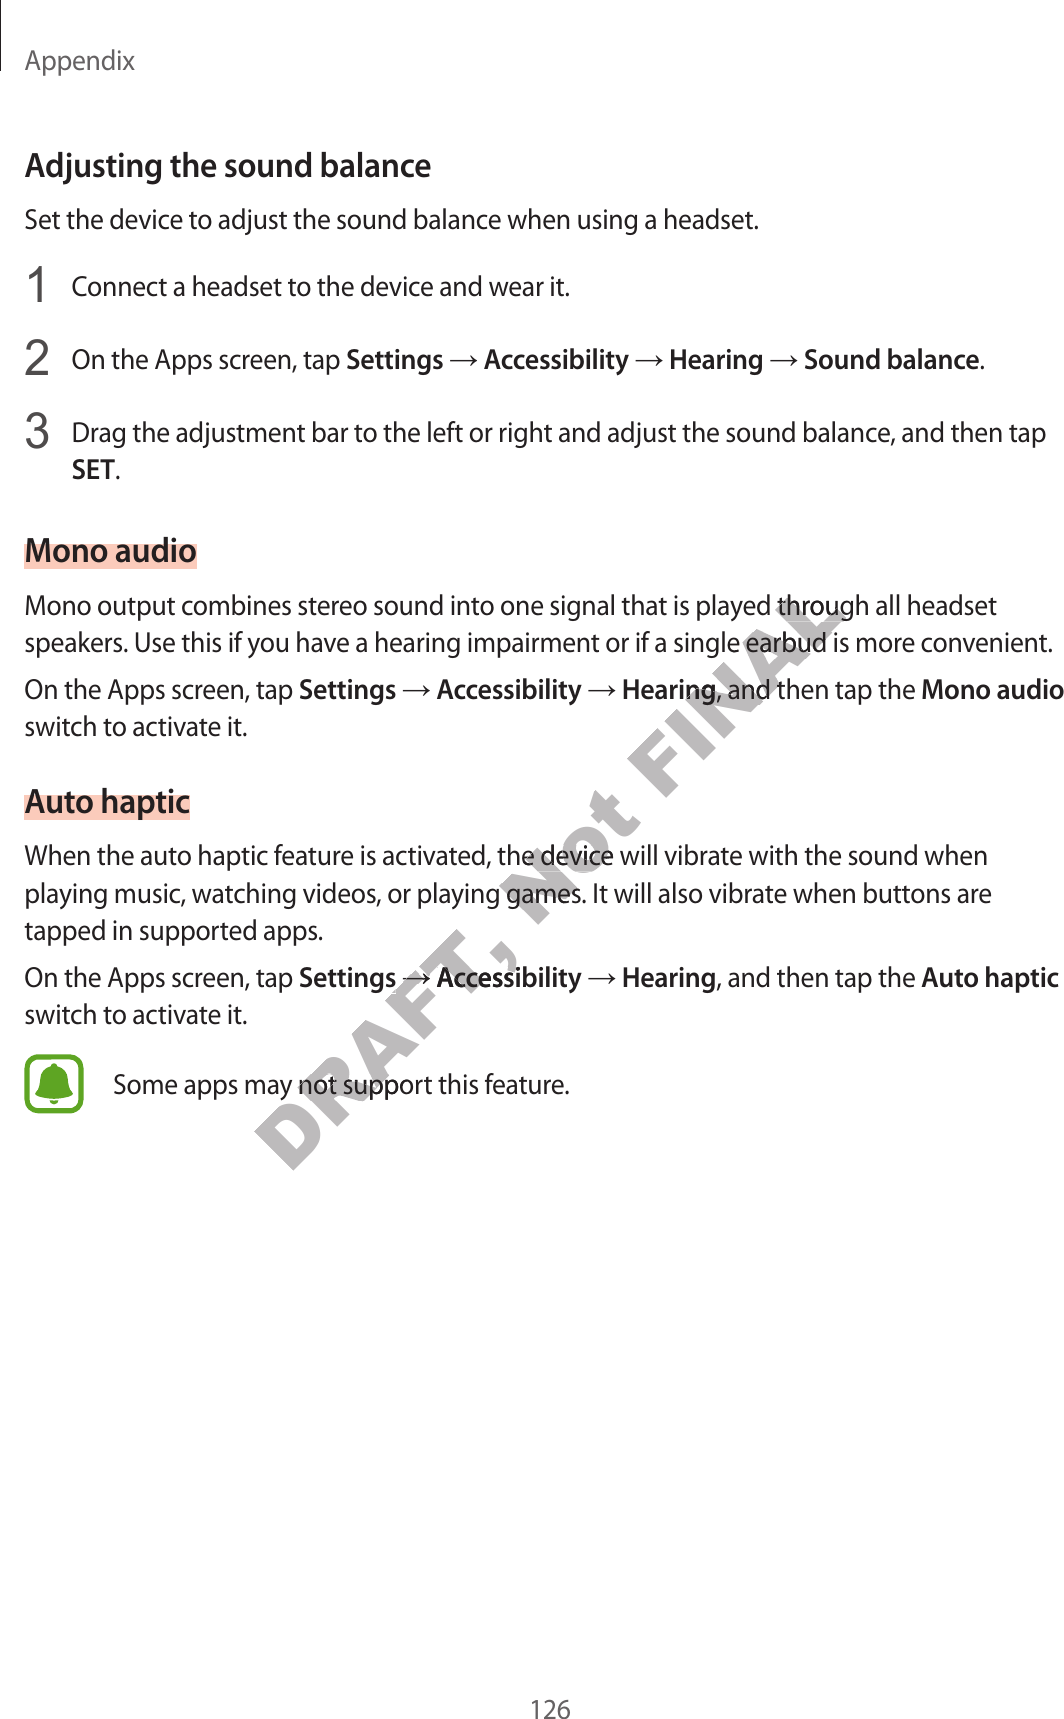 Appendix126Adjusting the sound balanceSet the device to adjust the sound balance when using a headset.1  Connect a headset to the device and wear it.2  On the Apps screen, tap Settings ĺ Accessibility ĺ Hearing ĺ Sound balance.3  Drag the adjustment bar to the left or right and adjust the sound balance, and then tap SET.Mono audioMono output combines stereo sound into one signal that is played through all headset speakers. Use this if you have a hearing impairment or if a single earbud is more convenient.On the Apps screen, tap Settings ĺ Accessibility ĺ Hearing, and then tap the Mono audio switch to activate it.Auto hapticWhen the auto haptic feature is activated, the device will vibrate with the sound when playing music, watching videos, or playing games. It will also vibrate when buttons are tapped in supported apps.On the Apps screen, tap Settings ĺ Accessibility ĺ Hearing, and then tap the Auto haptic switch to activate it.Some apps may not support this feature.DRAFT, ying gamesettingsettingsĺĺDRAFT, AccessibilitAccessibilitome apps may not supporome apps may not supporNot , the device will vibr, the device will vibrying games. Iying games. IFINALed through all headseted through all headsett or if a single earbud is mort or if a single earbud is morHearingHearing, and then tap the , and then tap the 